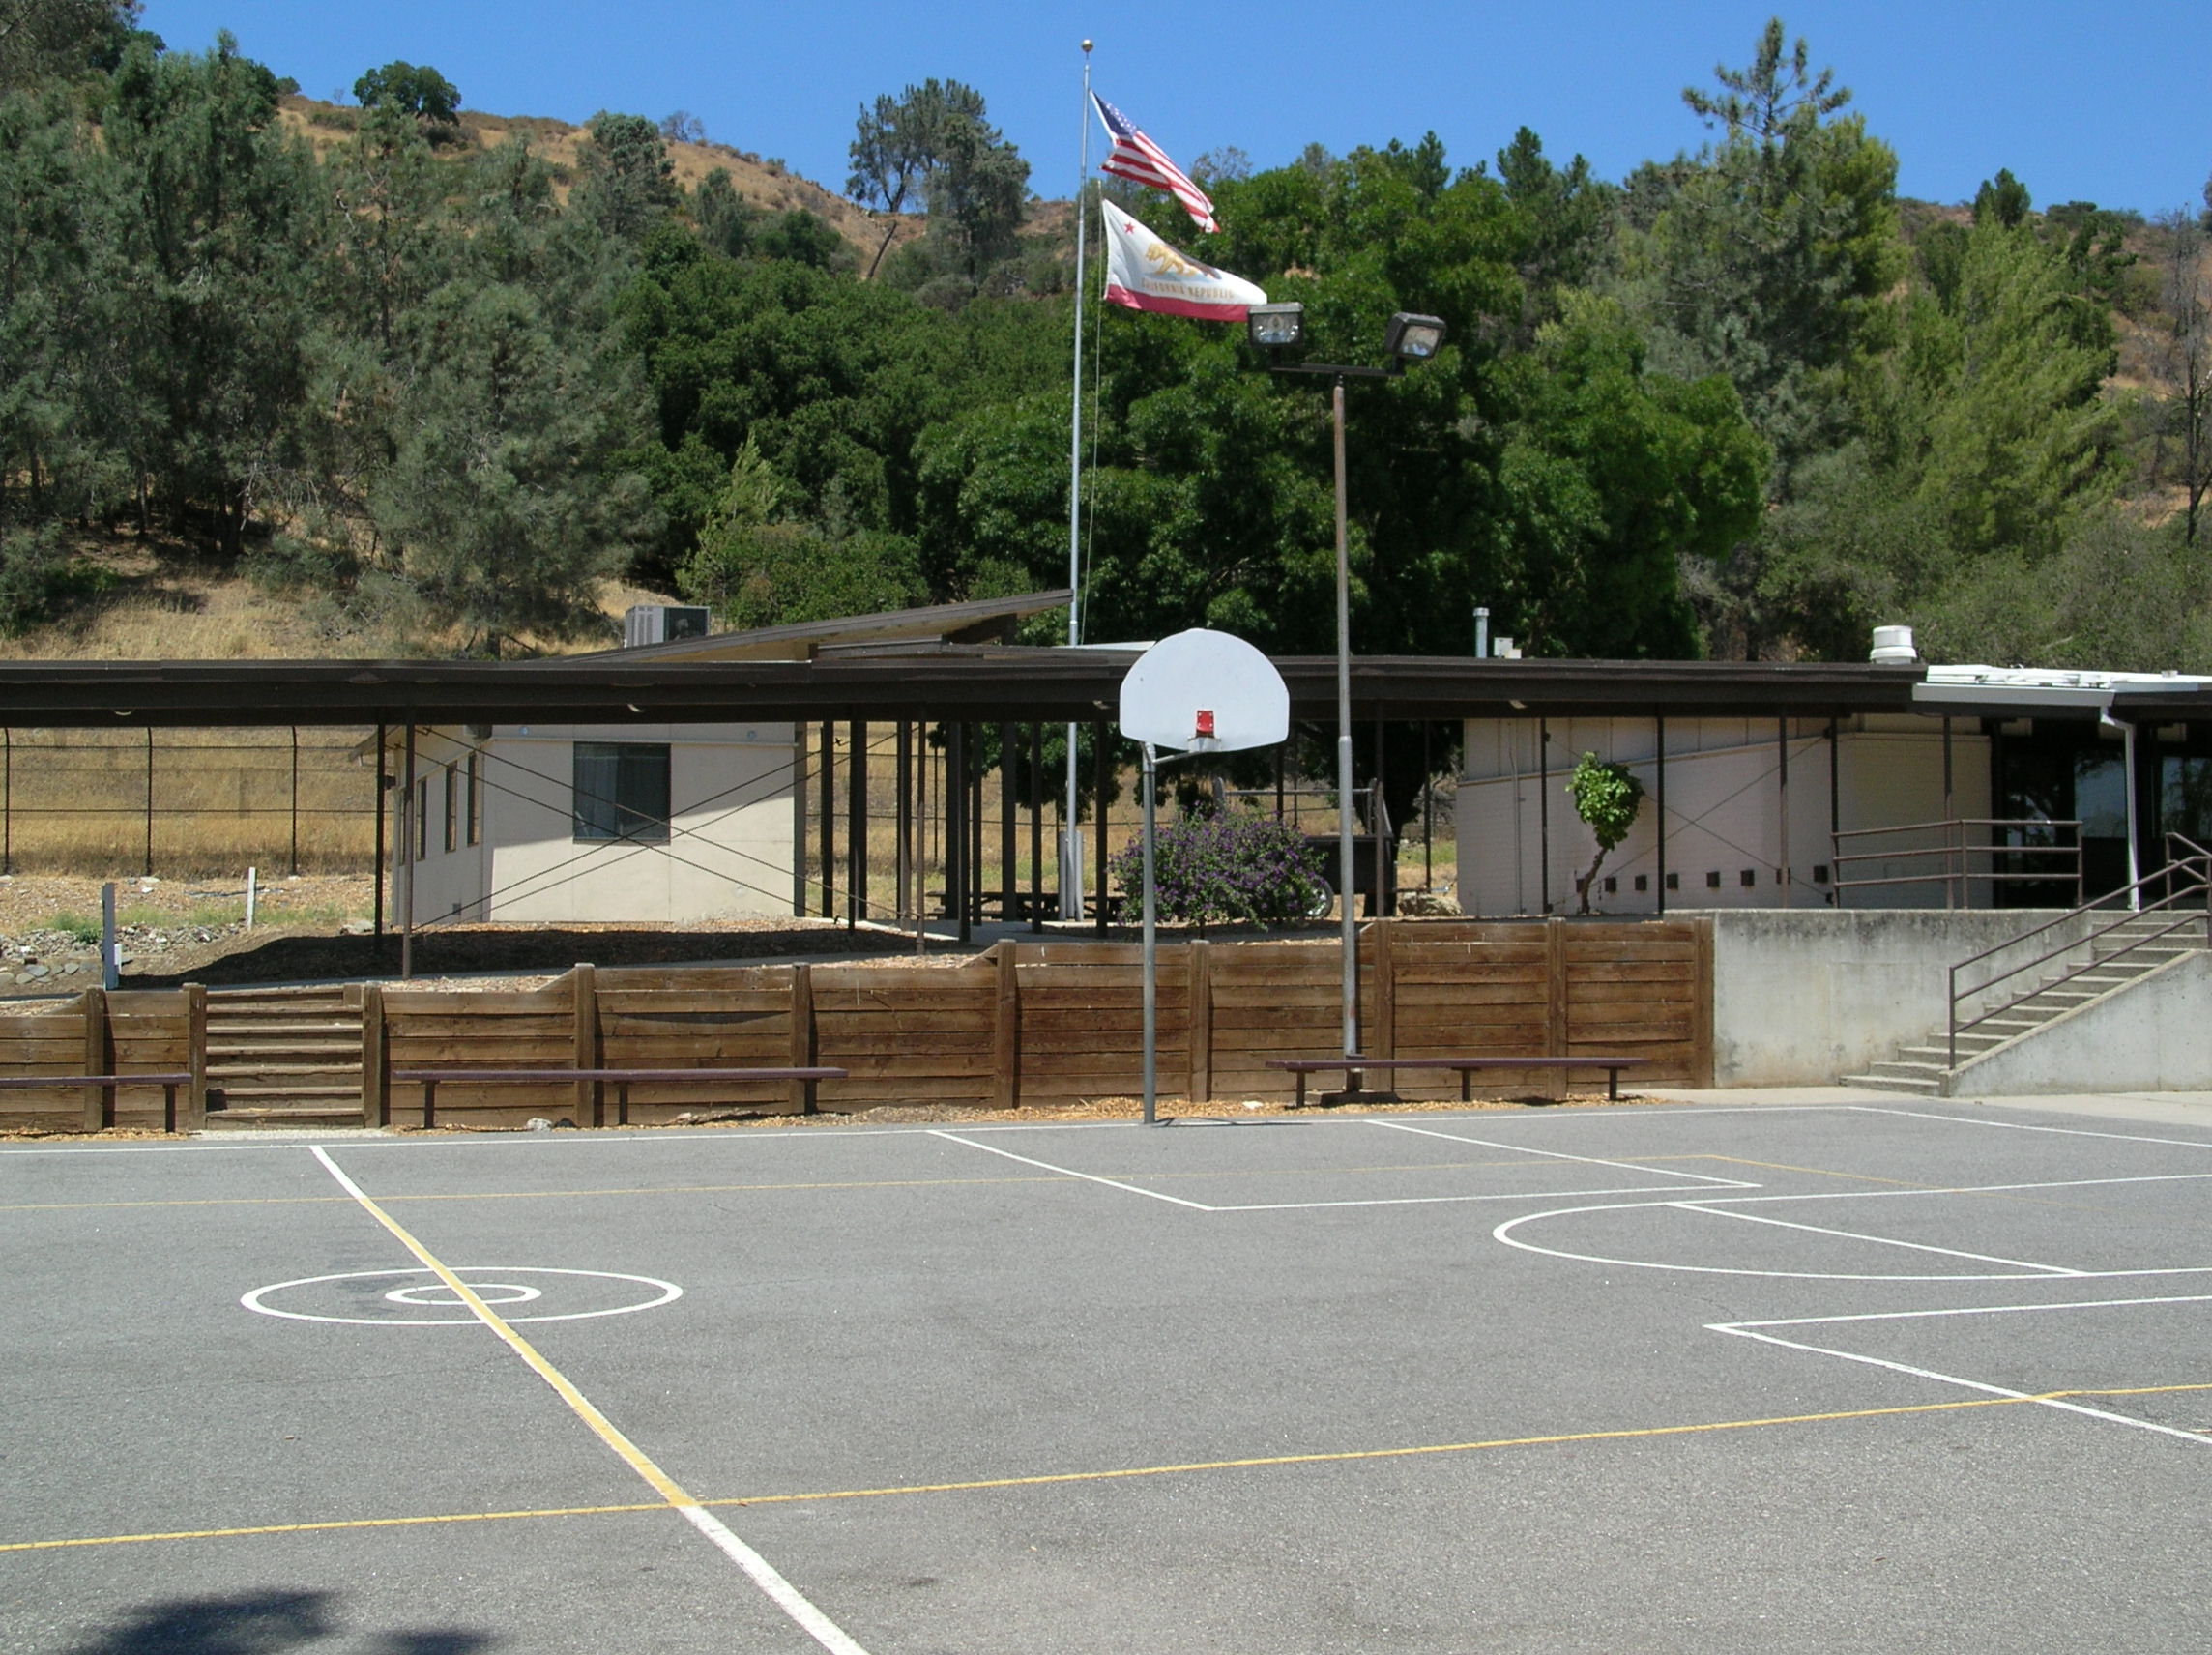 Picture of the James Ranch basketball court